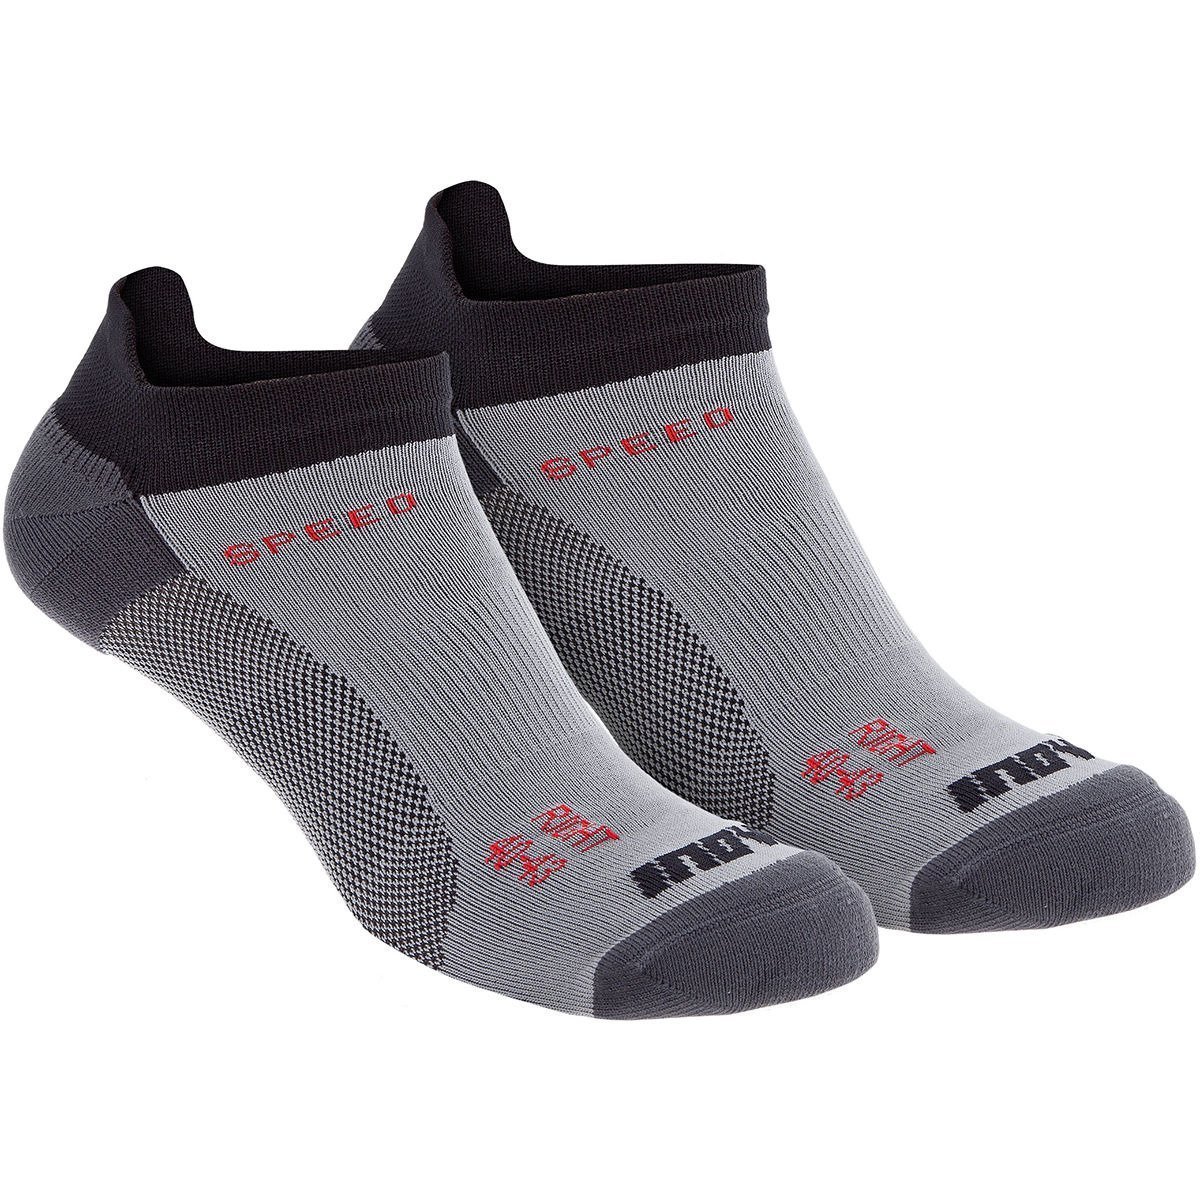 Inov8 Speed Low Running Socks Jogging Socks - Clothing and Shoes Casual ...